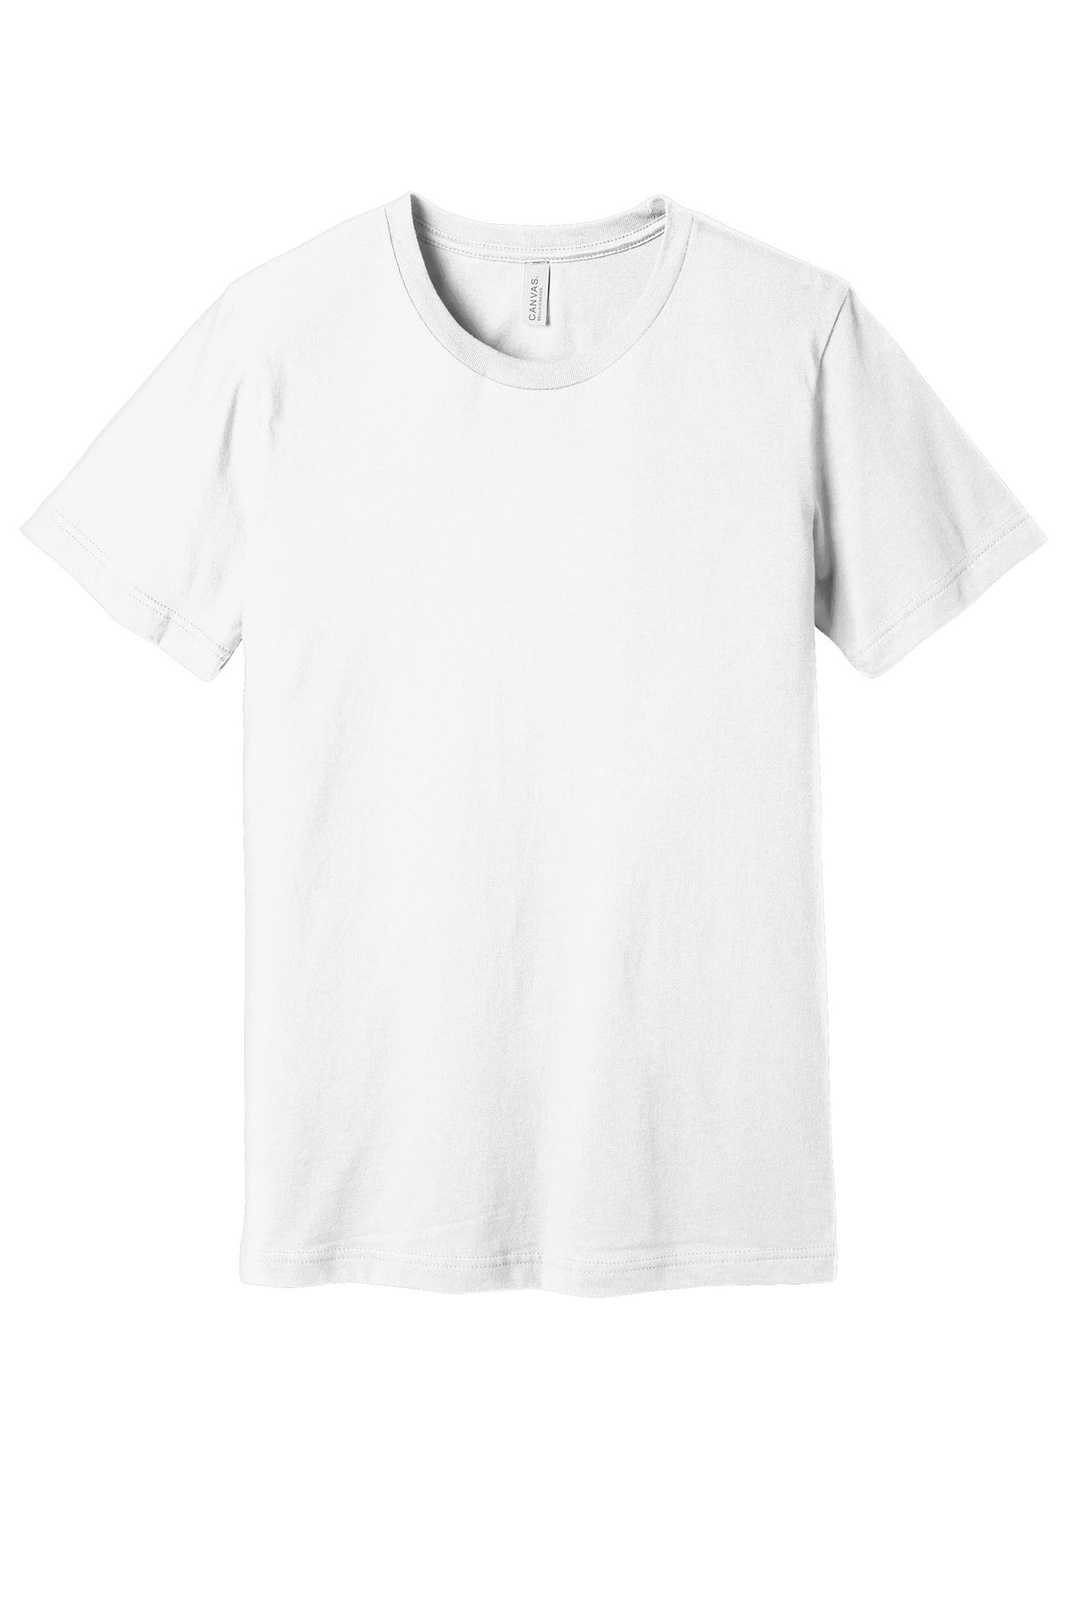 Bella + Canvas 3001 Unisex Jersey Short Sleeve Tee - White - HIT a Double